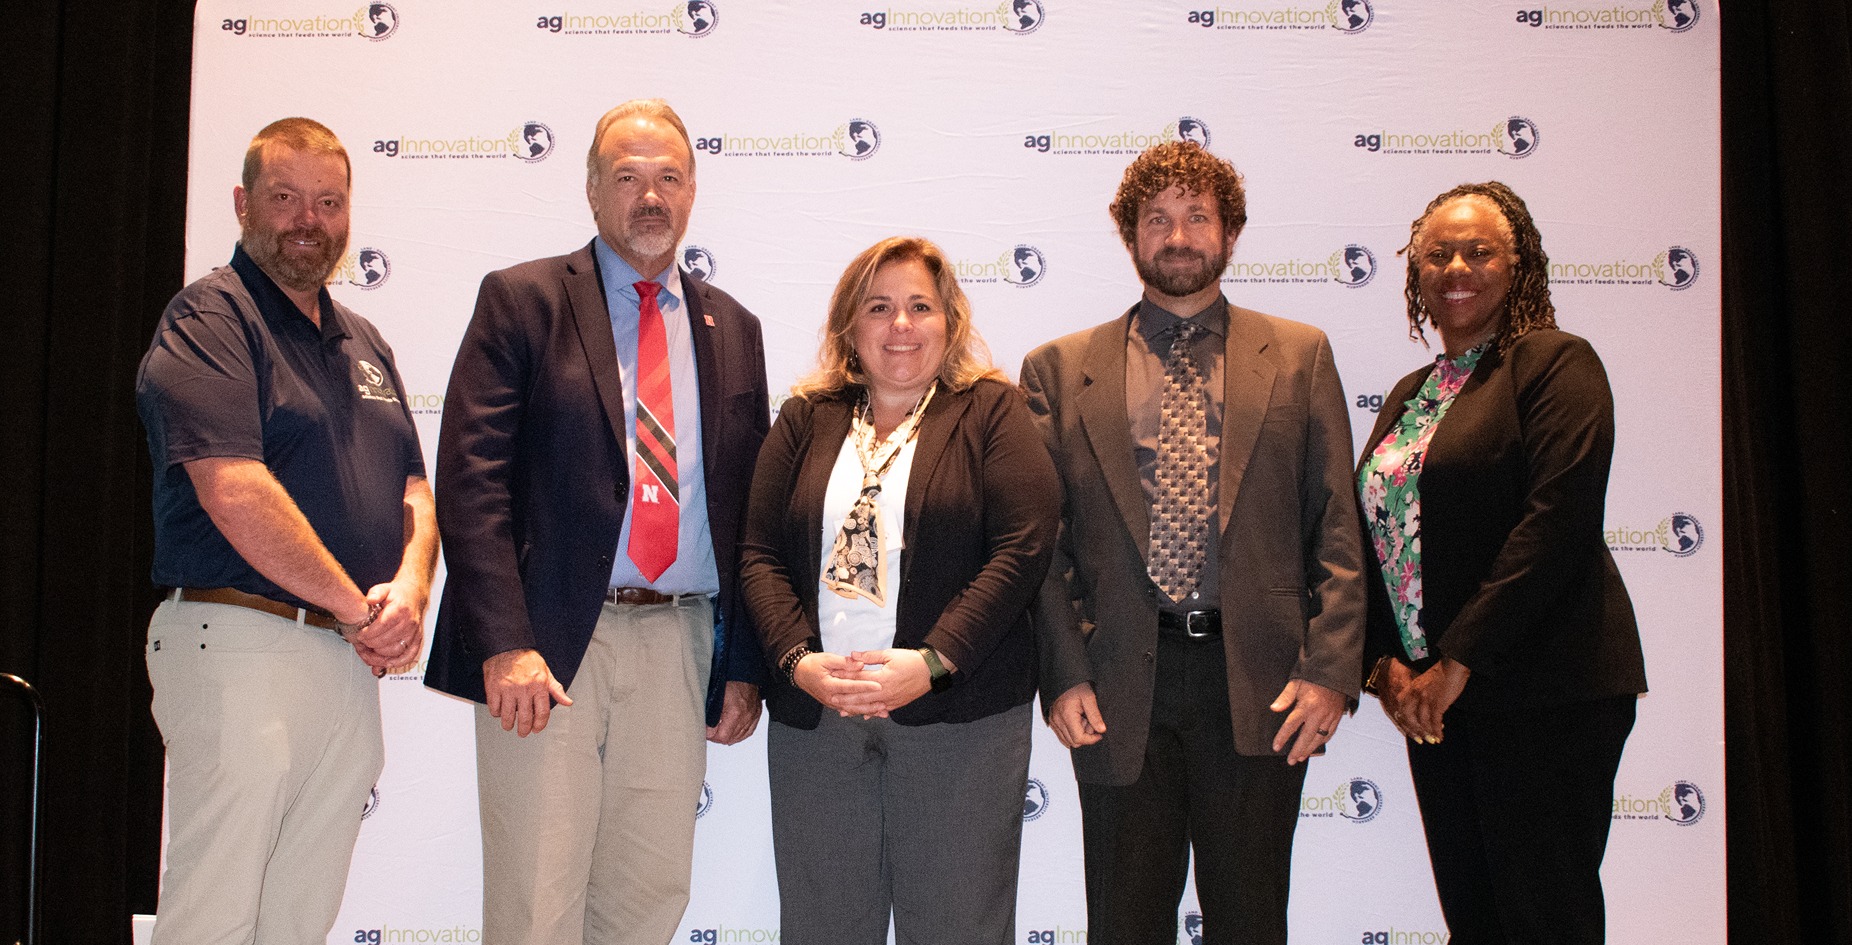 The NCERA-137 Multistate Research Group accepts award for their work on soybean pathology.